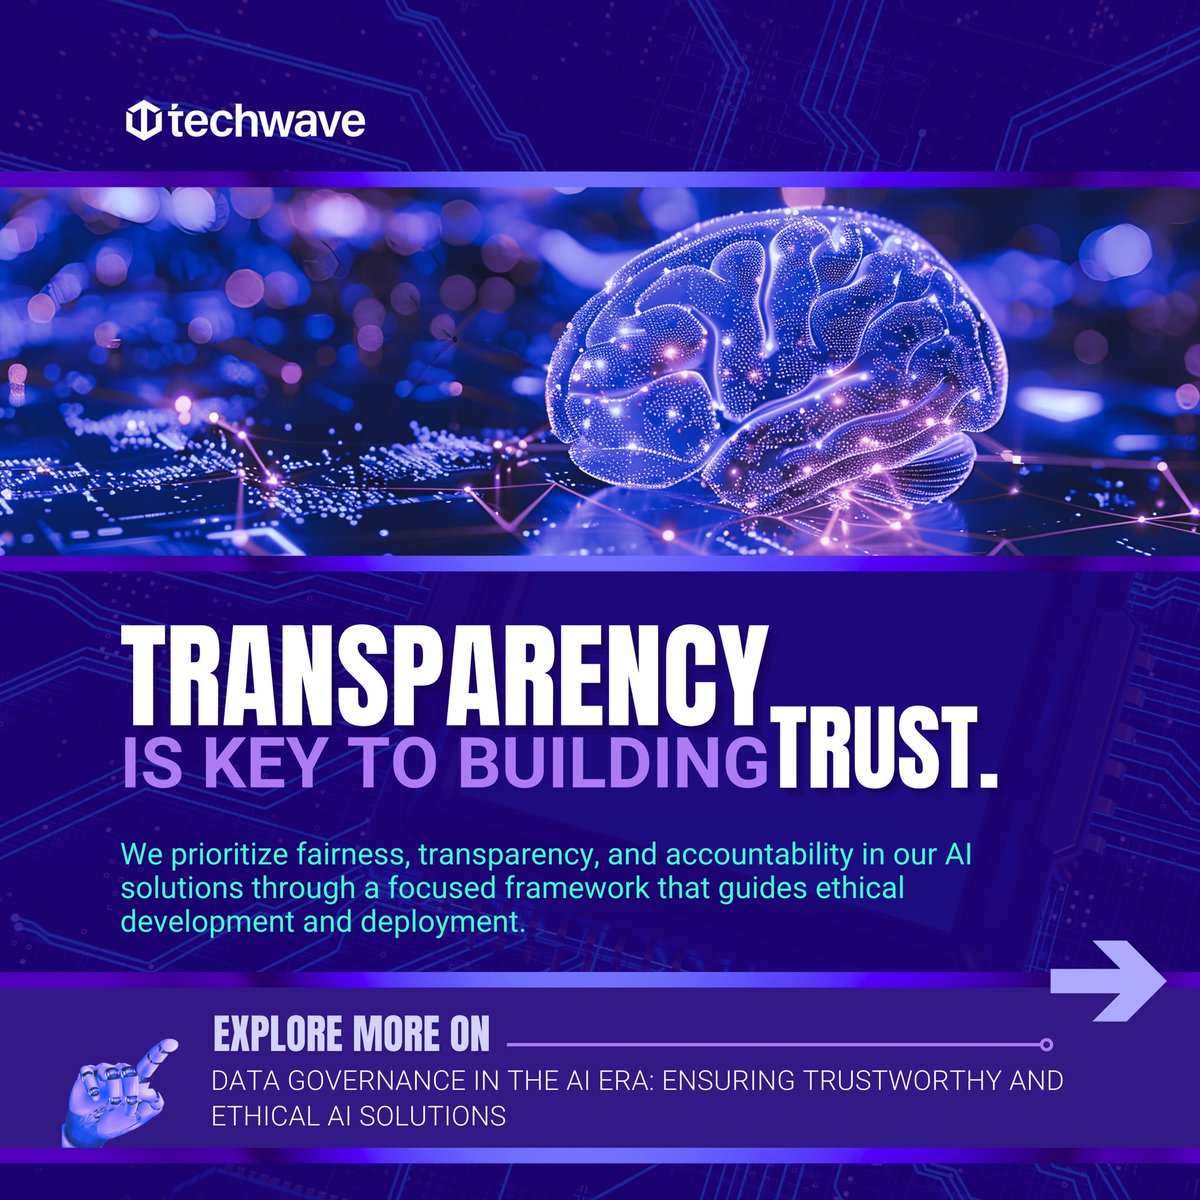 Trust starts with transparency! At Techwave, we're committed to fairness, transparency, and accountability in our AI solutions. Dive into our ethical development framework and join us in shaping the future of technology. Learn more at our blog techwave.net/data-governanc…